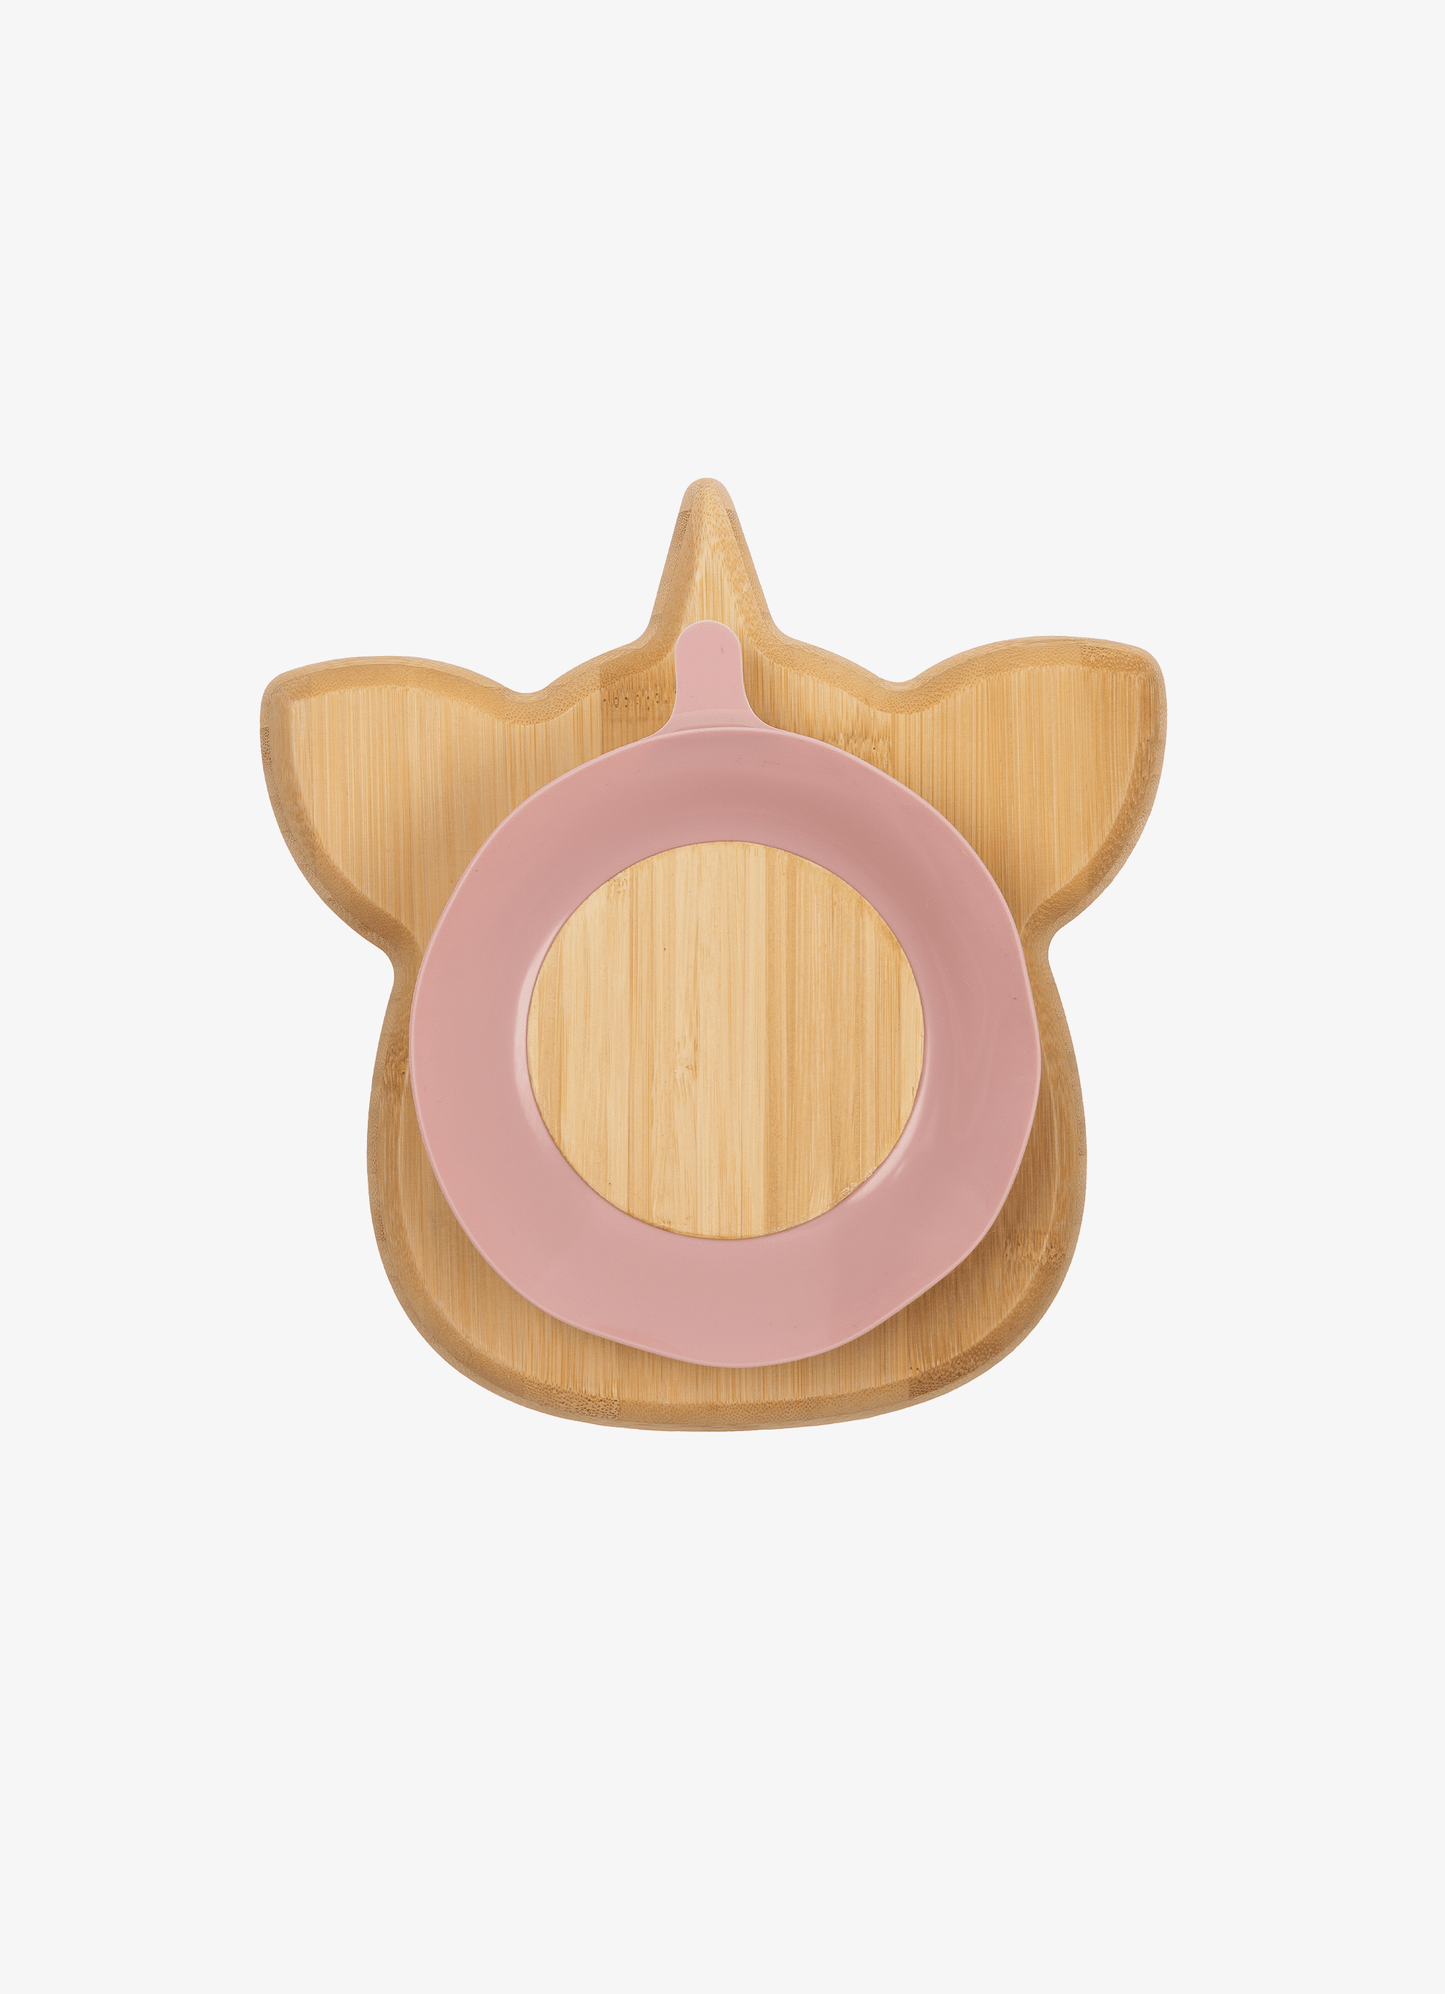 Small Bamboo Plate & spoon- Unicorn + with suction